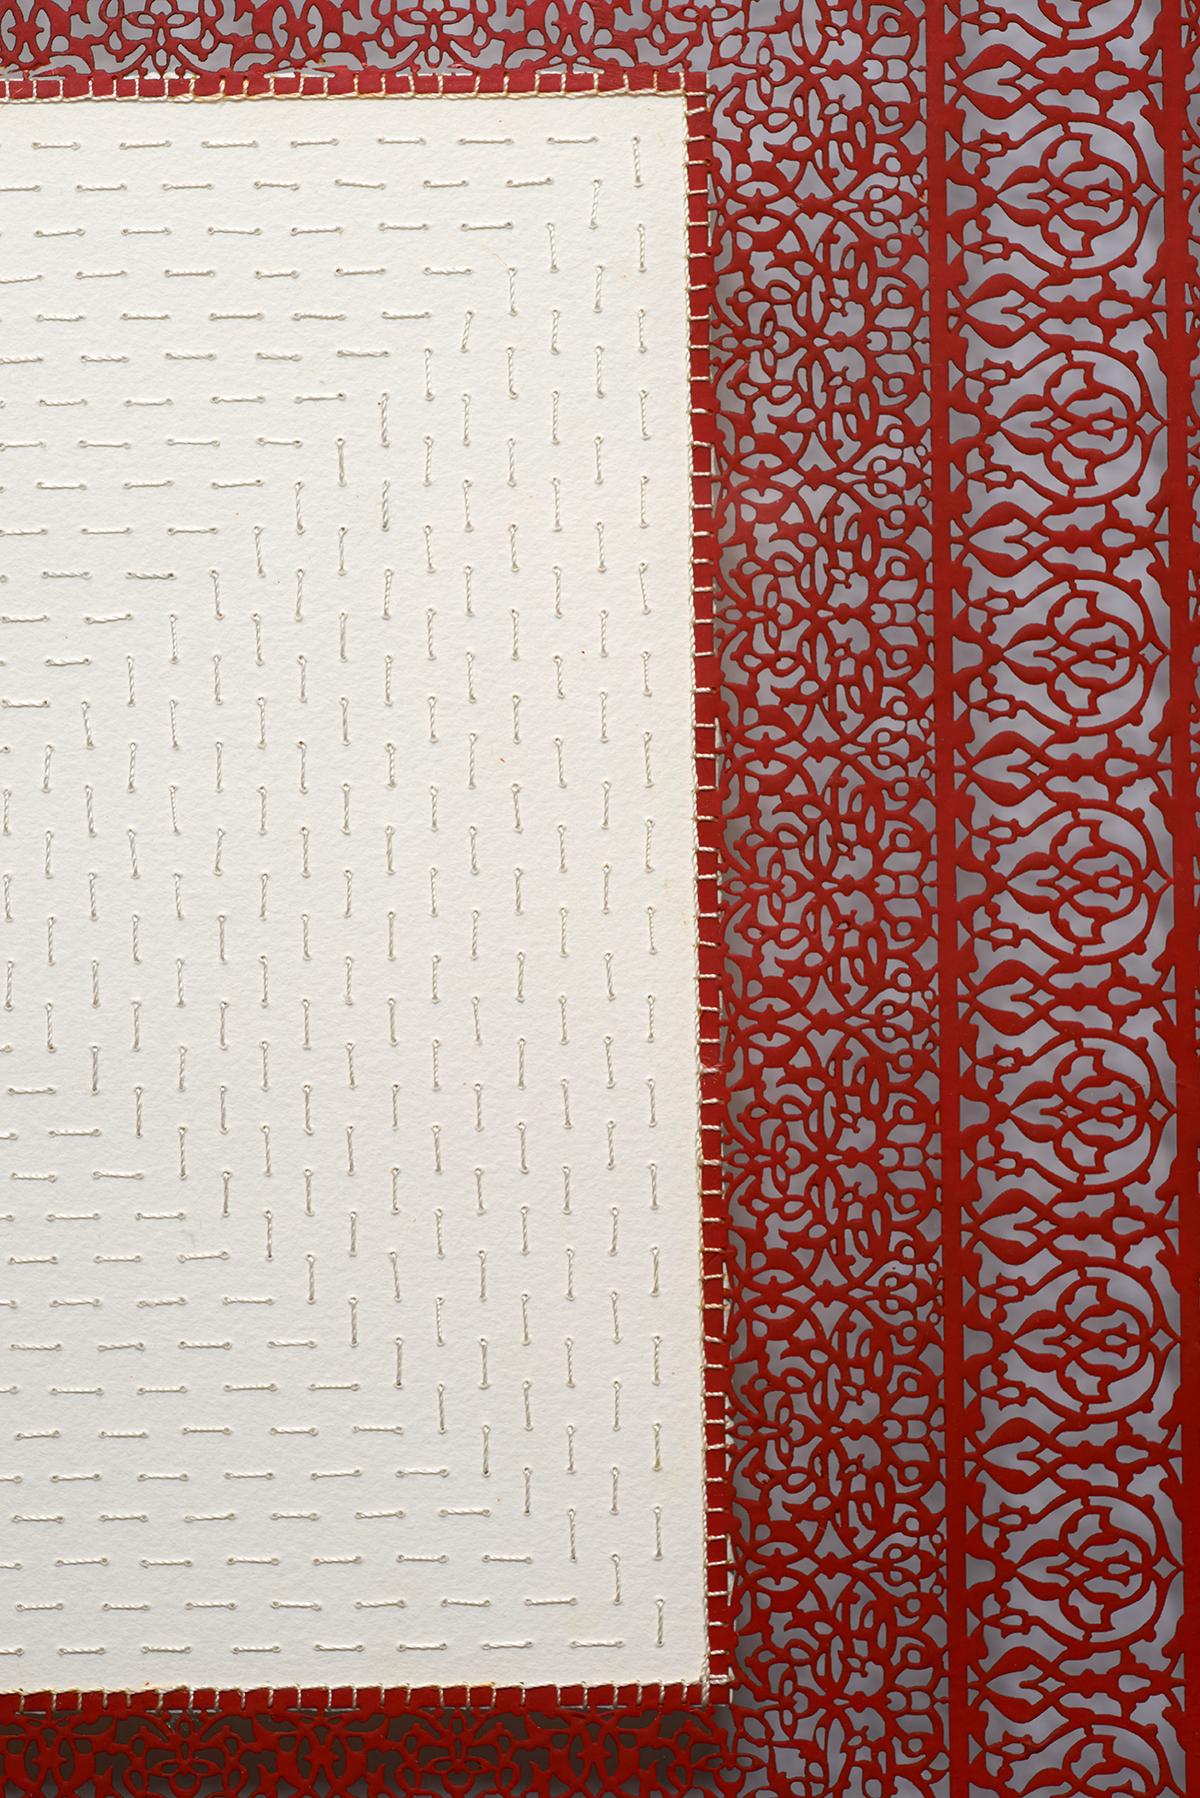 Laser-cut encaustic red burgundy floral embroidery on paper - Red Abstract Painting by Anila Quayyum Agha